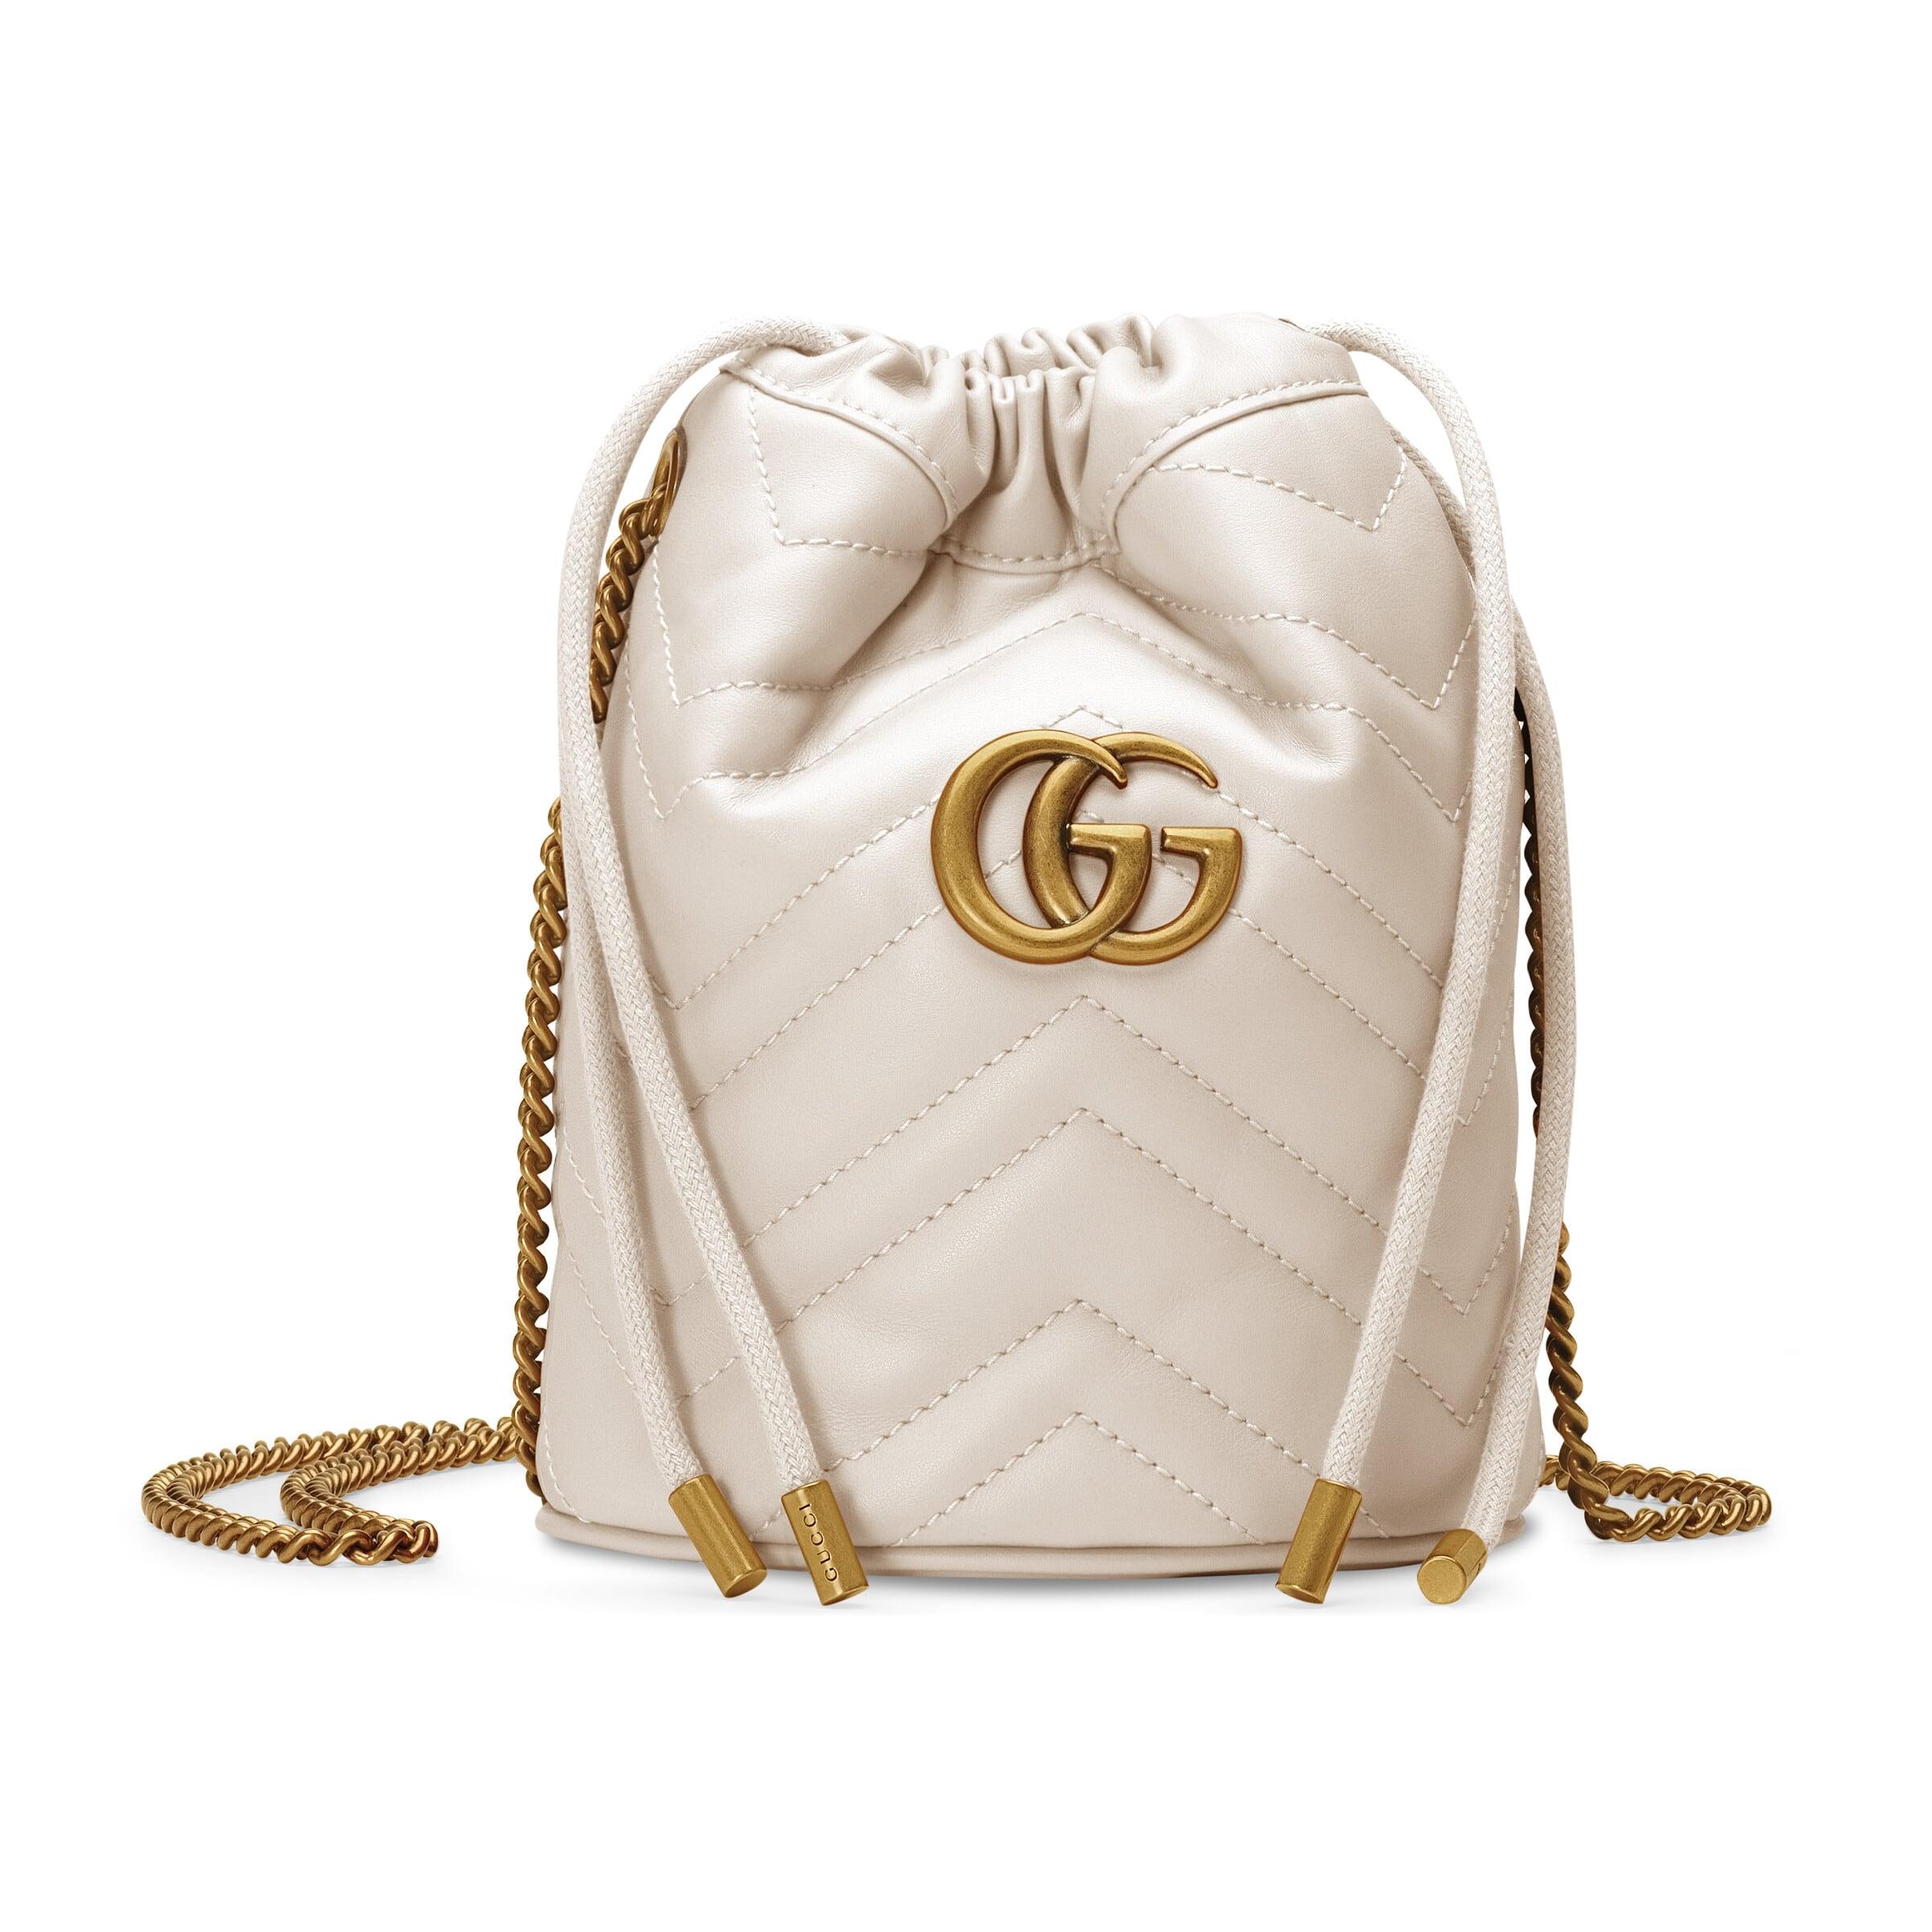 Gucci Leather GG Marmont Mini Bucket Bag in White - Save 5% - Lyst